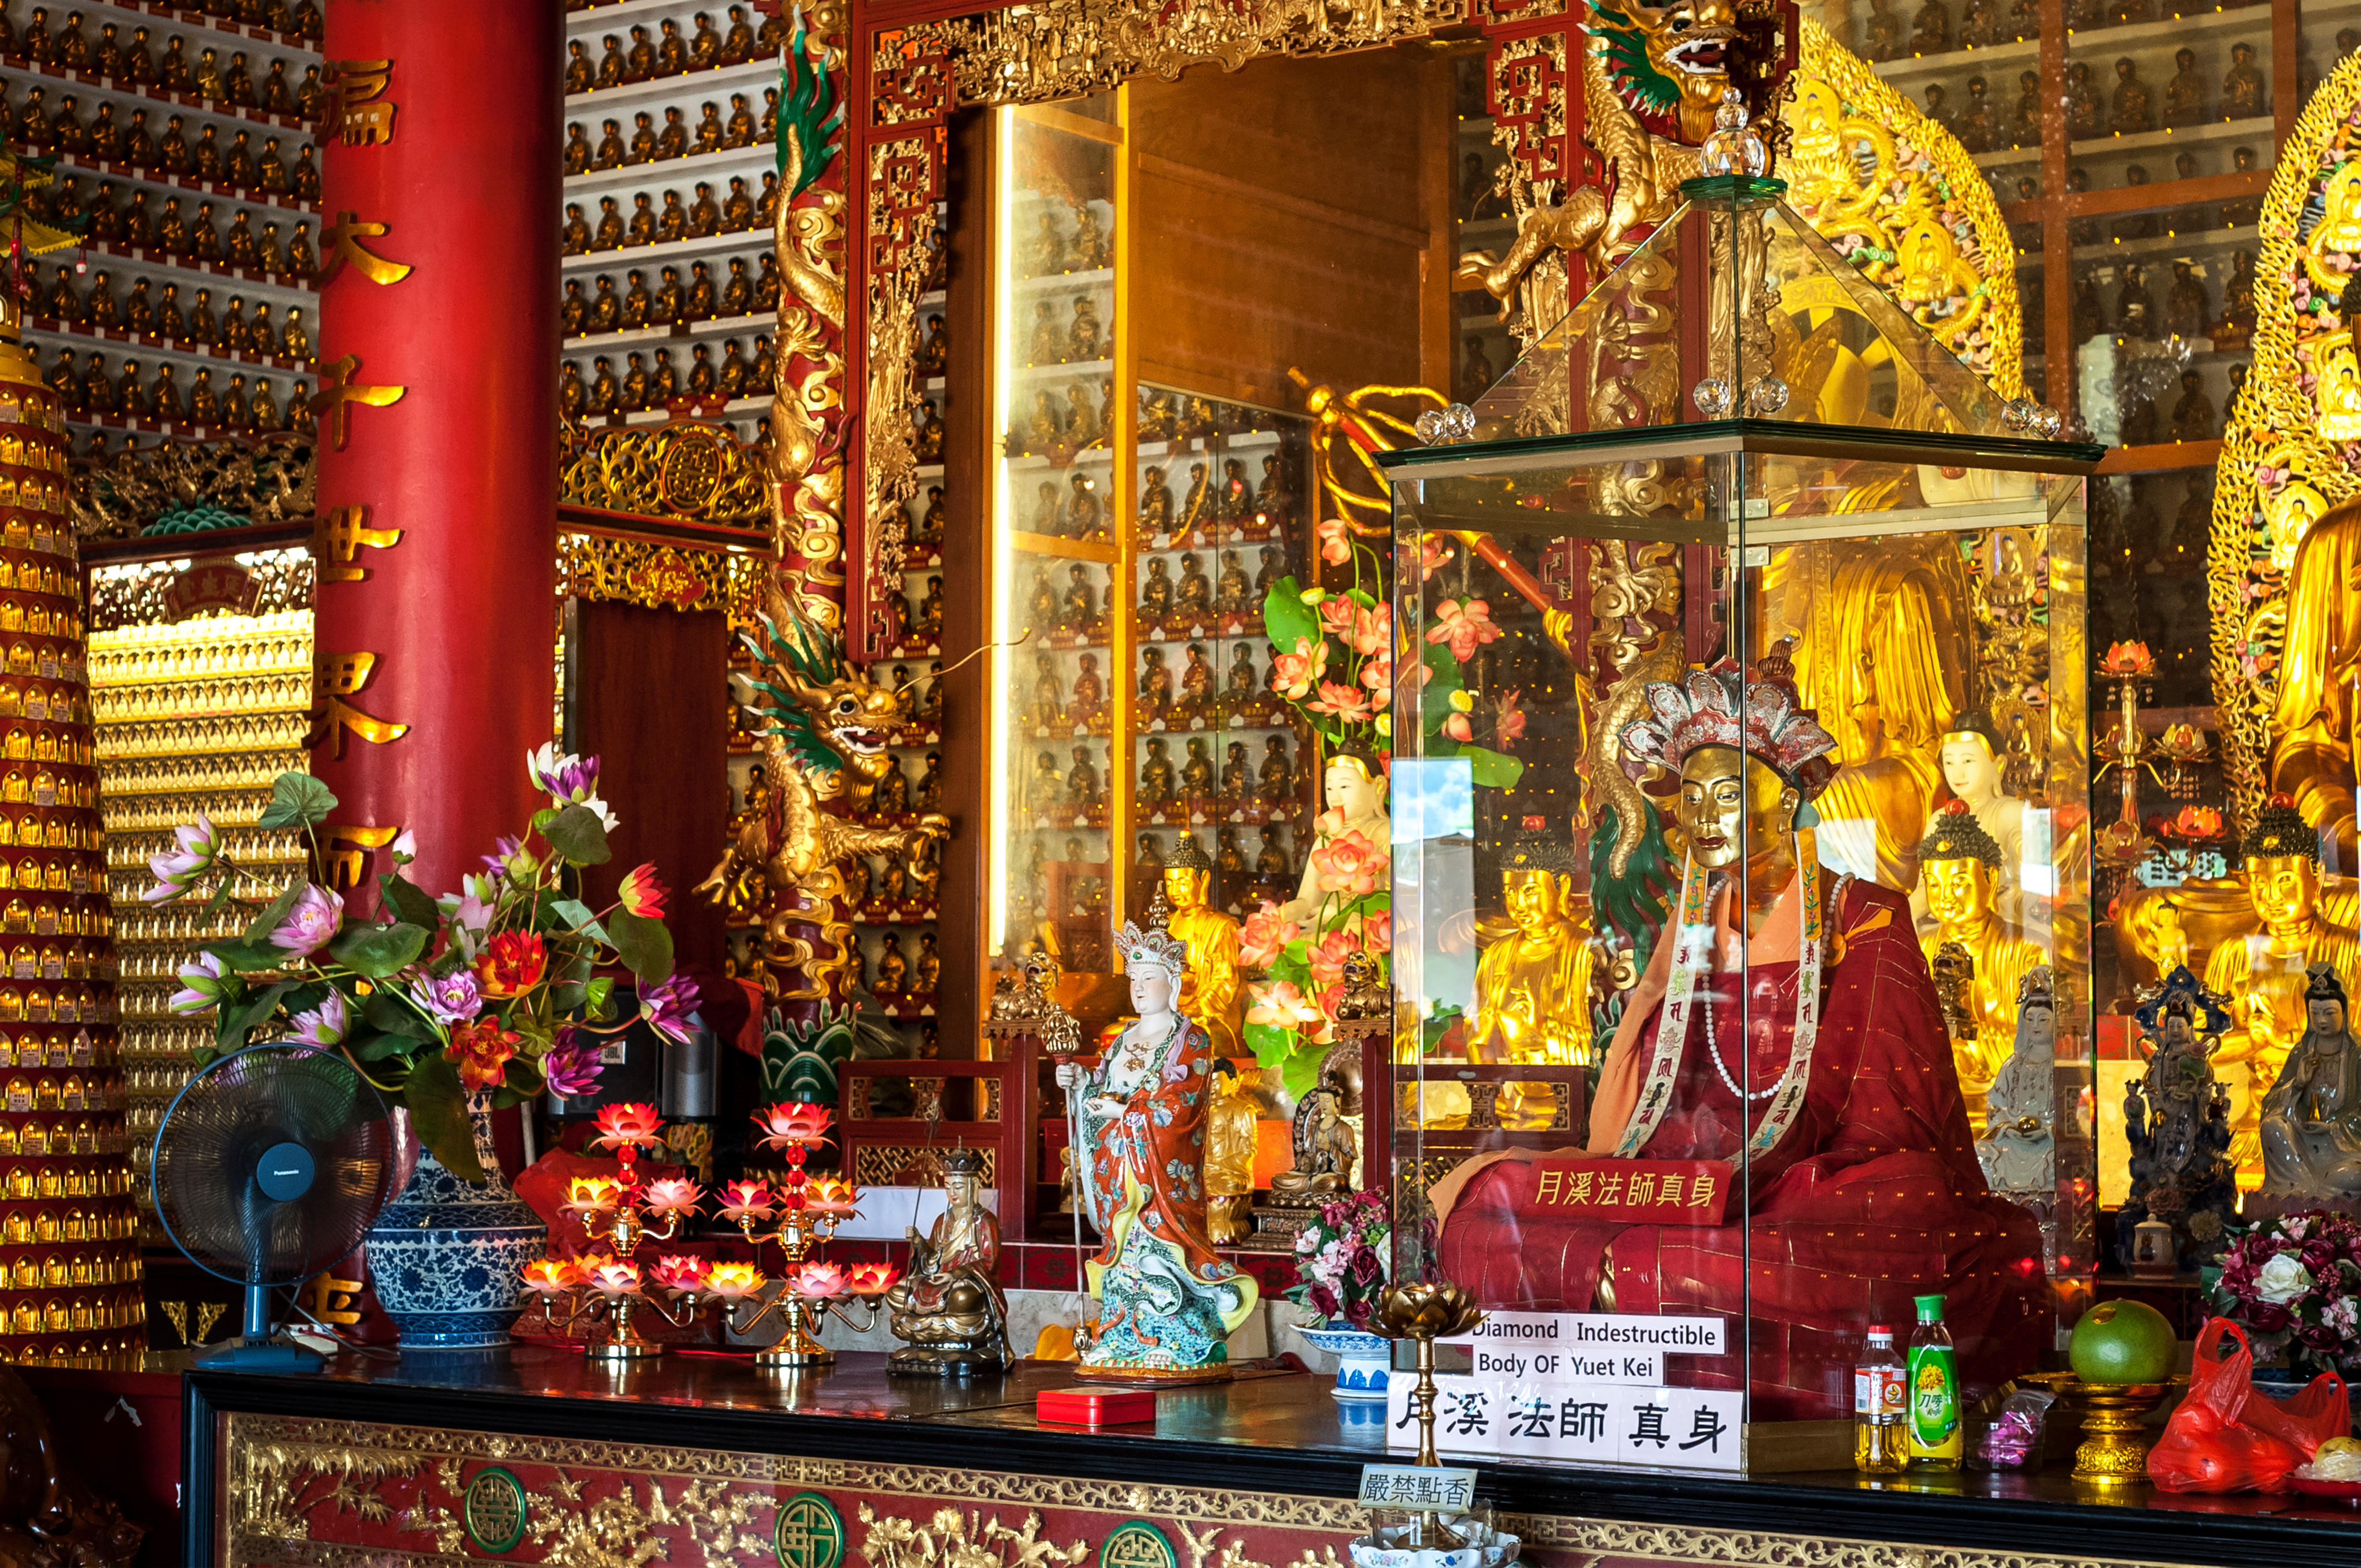 Ten Thousand Buddhas Monastery - One of the Top Attractions in Hong ...